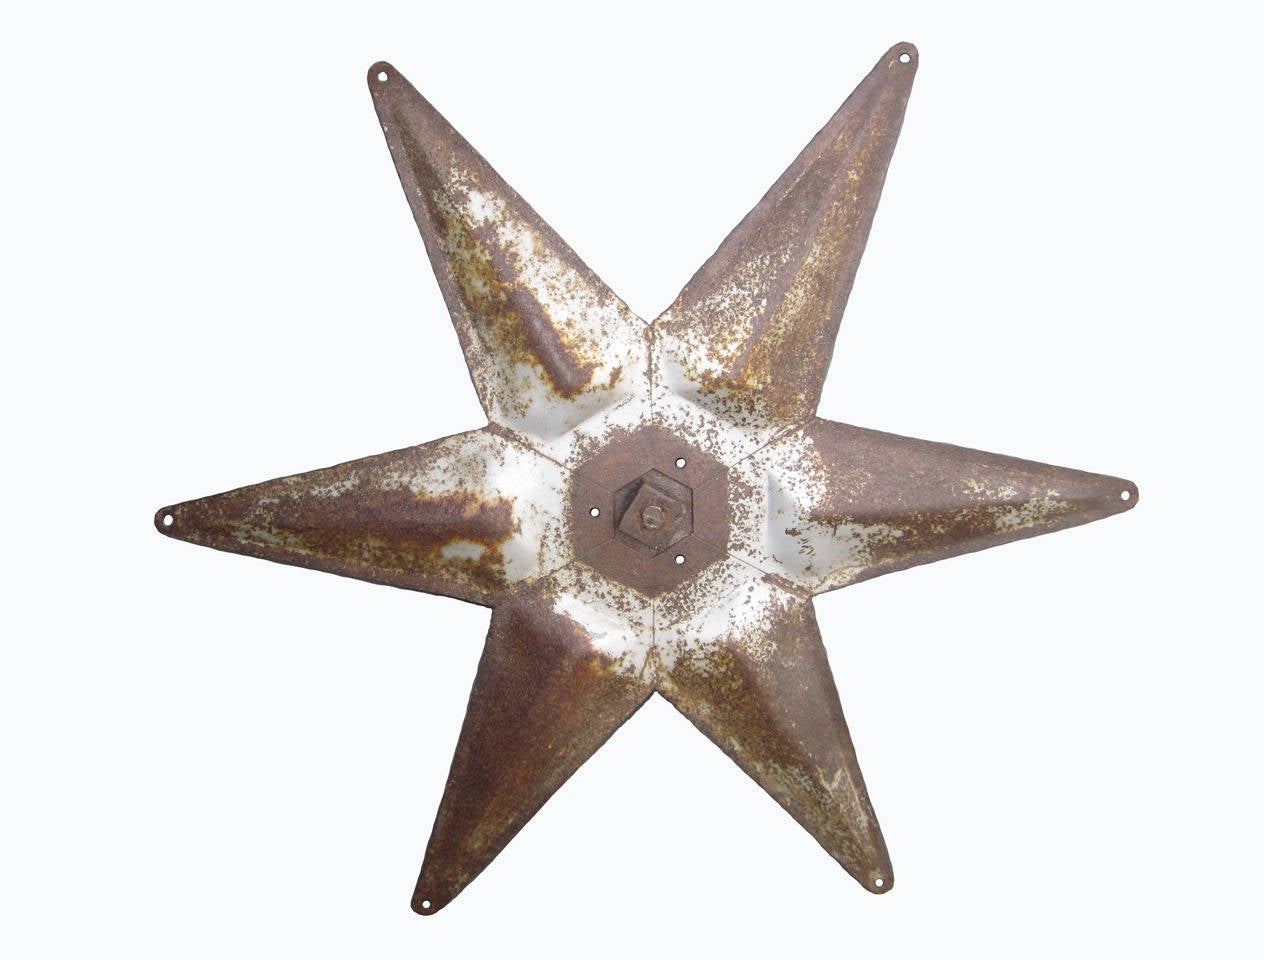 Large-scale Industrial metal star in old silver surface with custom wall hanging center bracket, circa 1930.